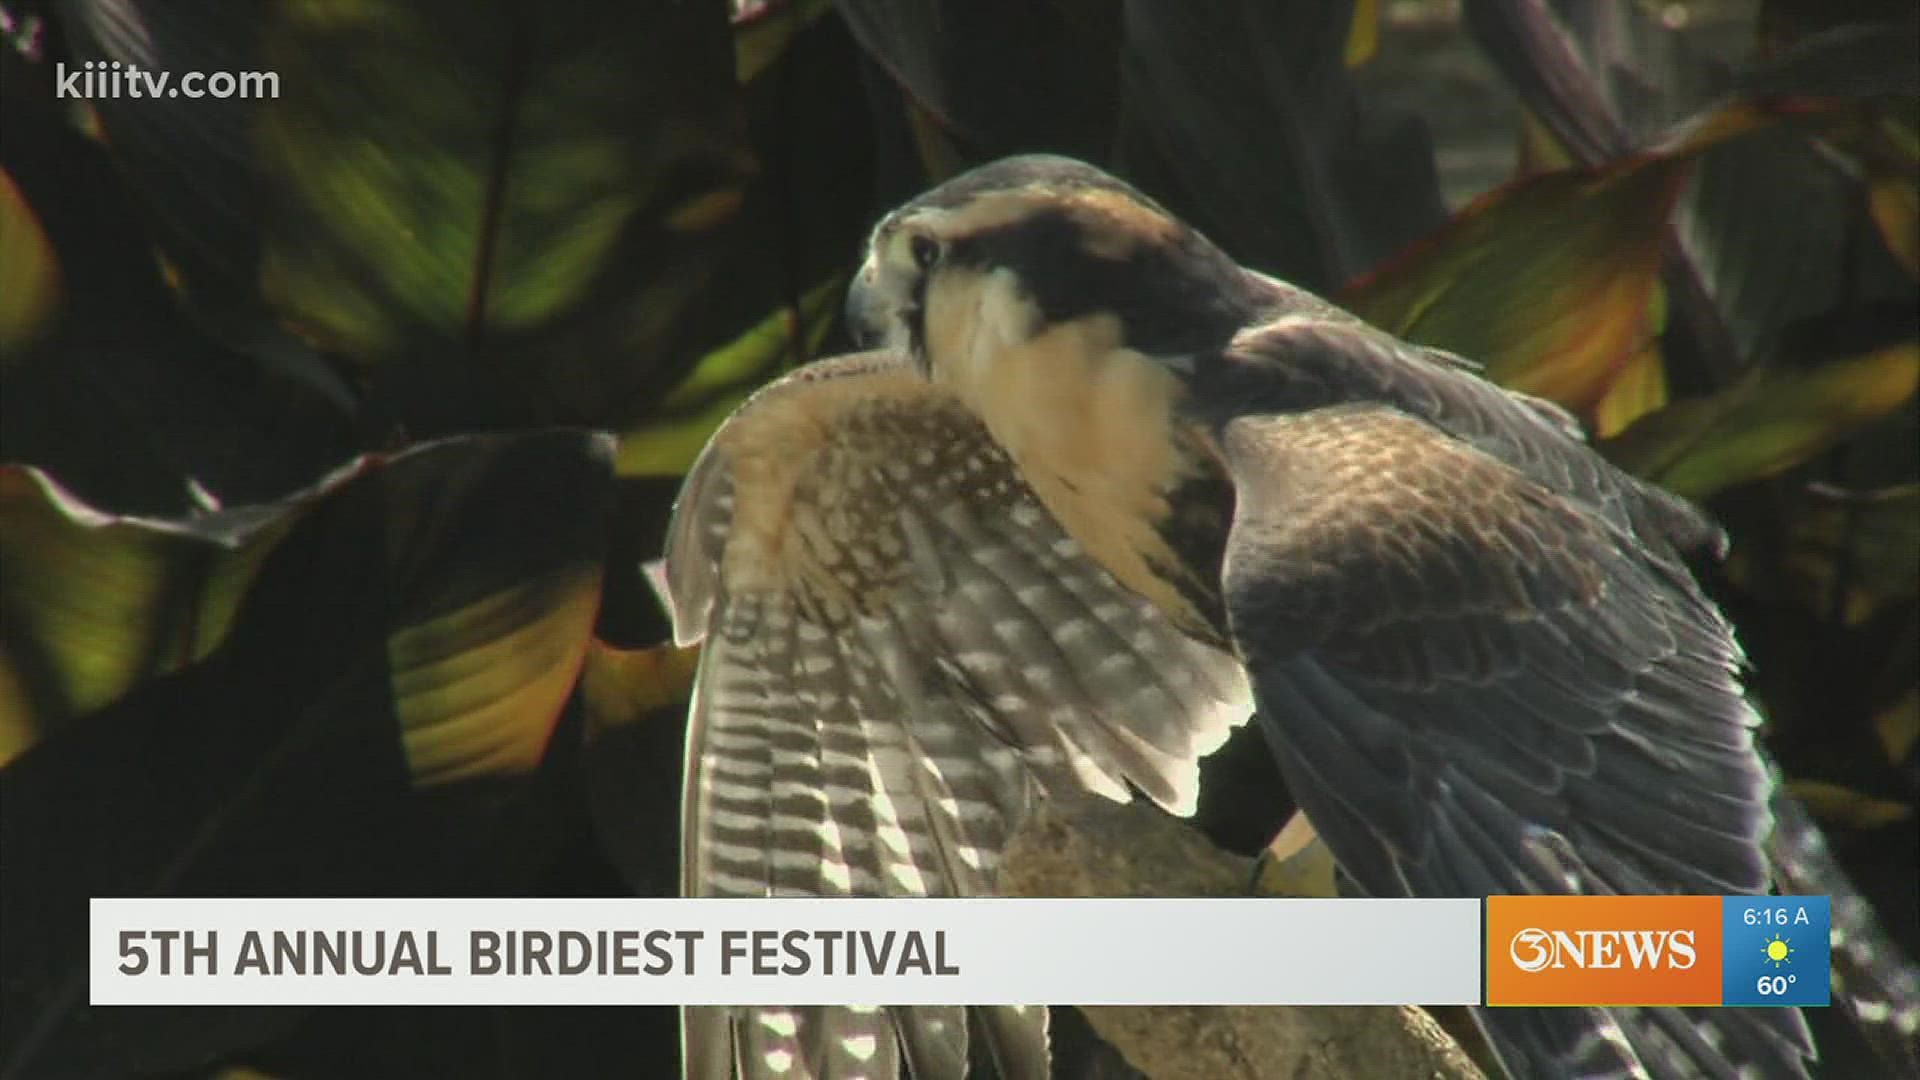 Last year, a record number of species sightings excited many bird enthusiasts during the event.